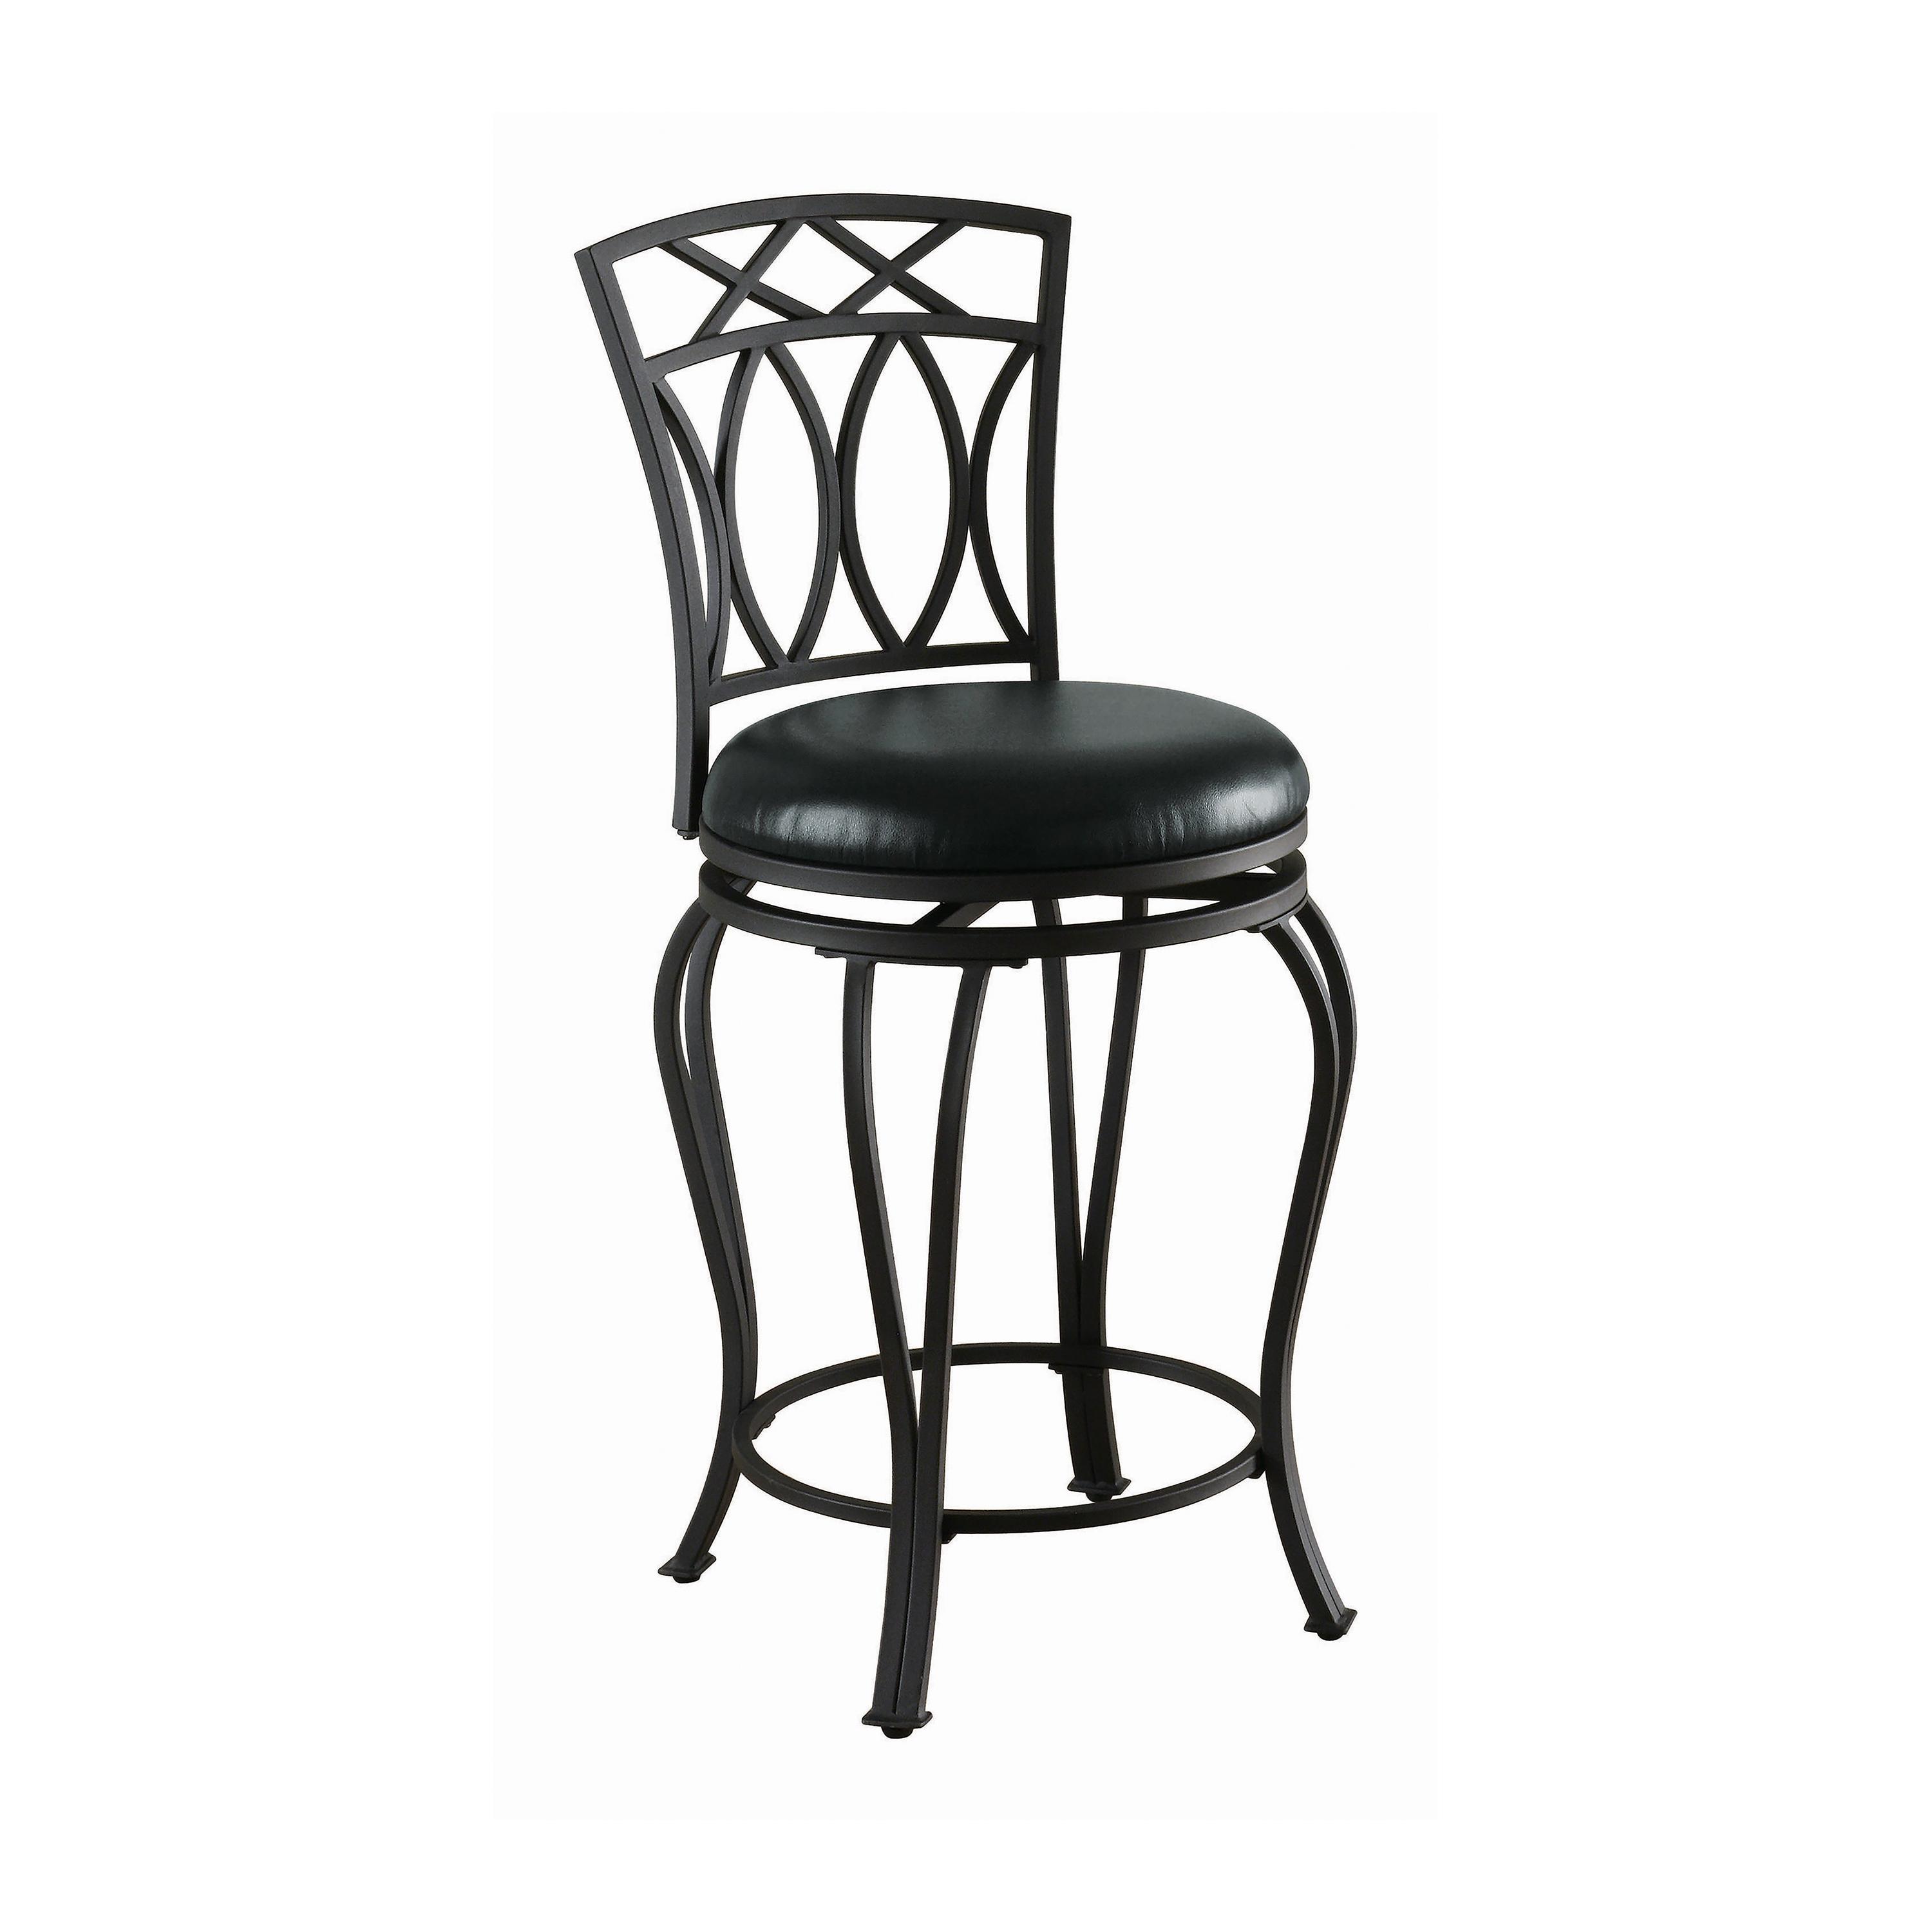 Transitional Counter Height Stool 122059 122059 in Black Leatherette